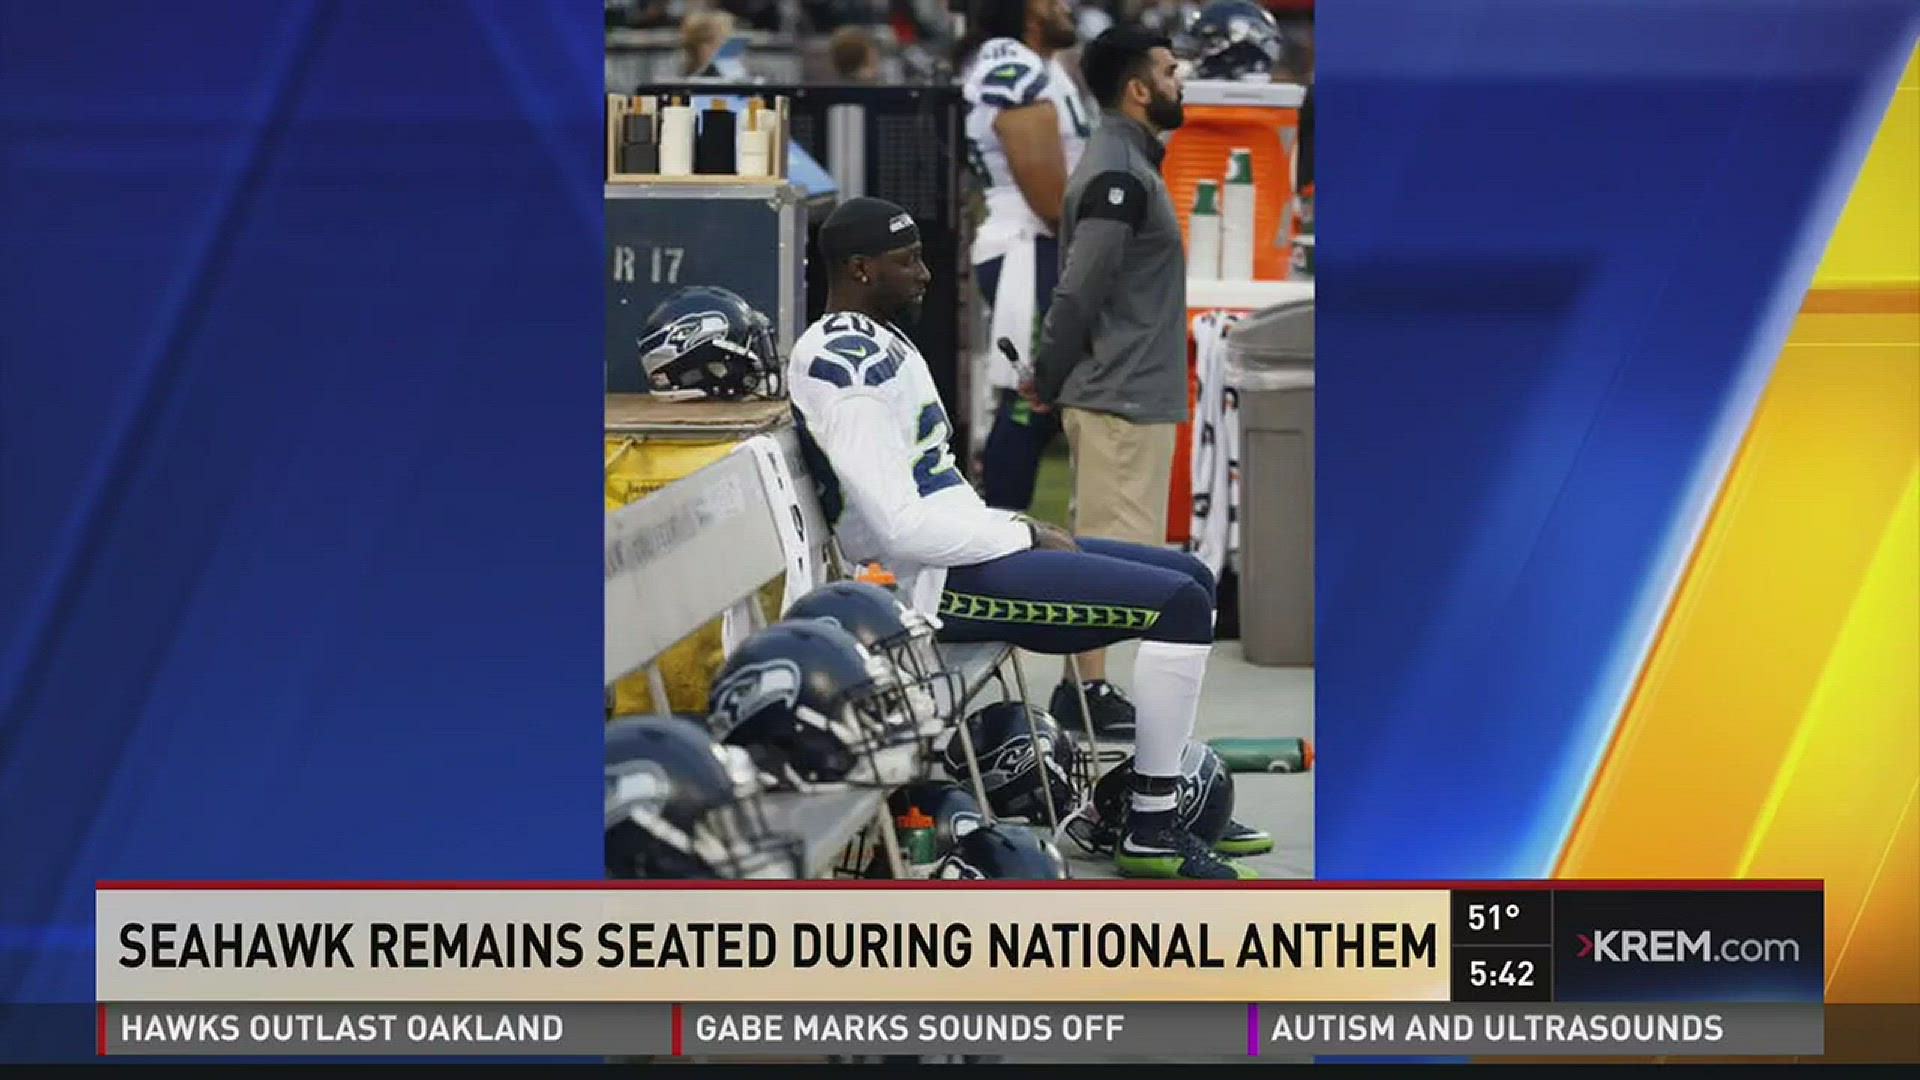 Cornerback Jeremy Lane took a seat alone on the bench during the National Anthem in Oakland last night.